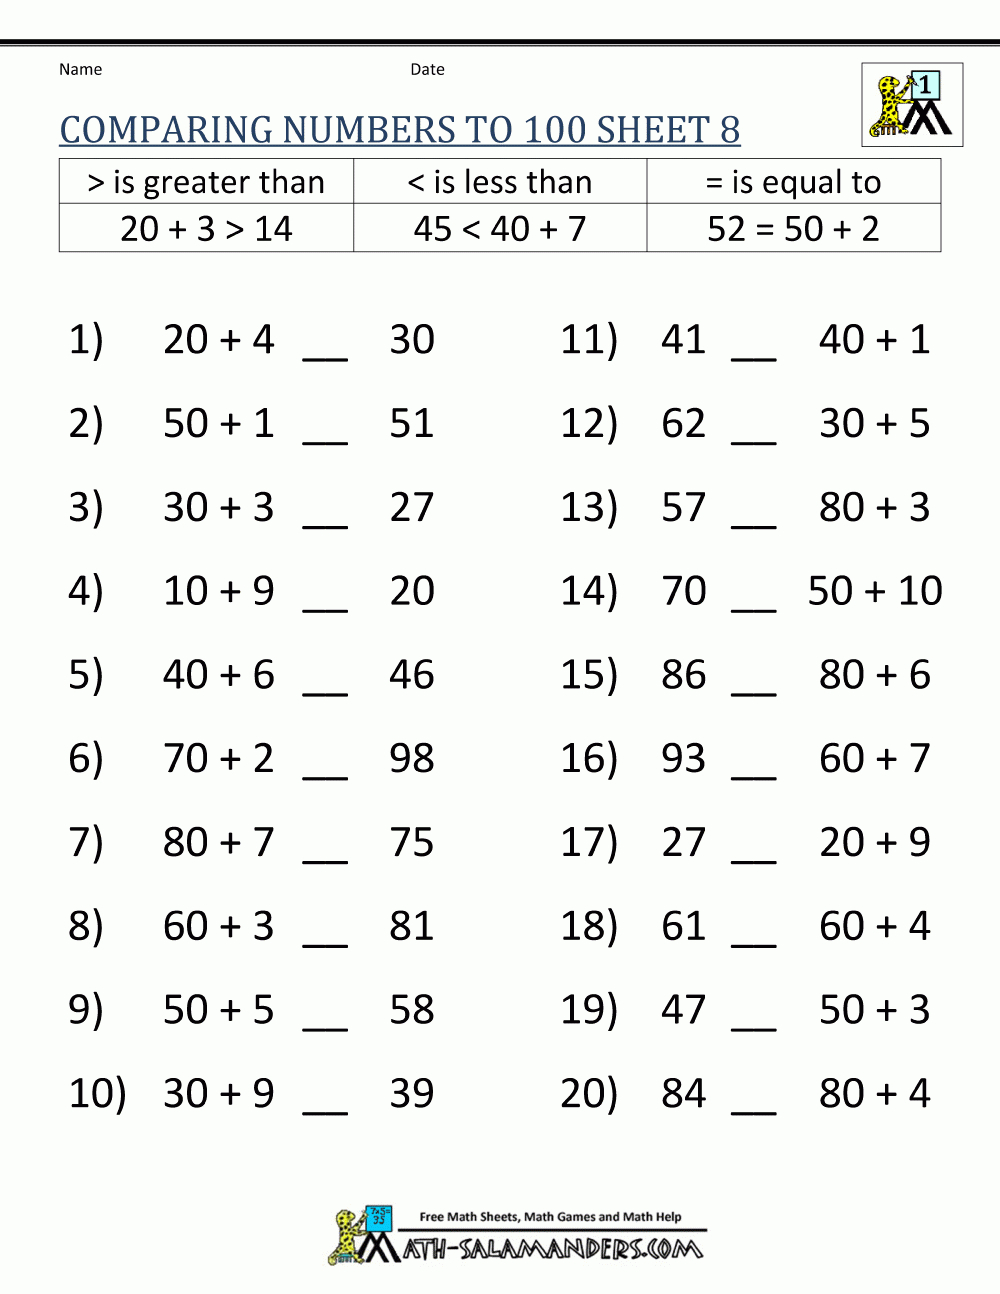 greater-than-less-than-worksheet-comparing-numbers-to-100-db-excel